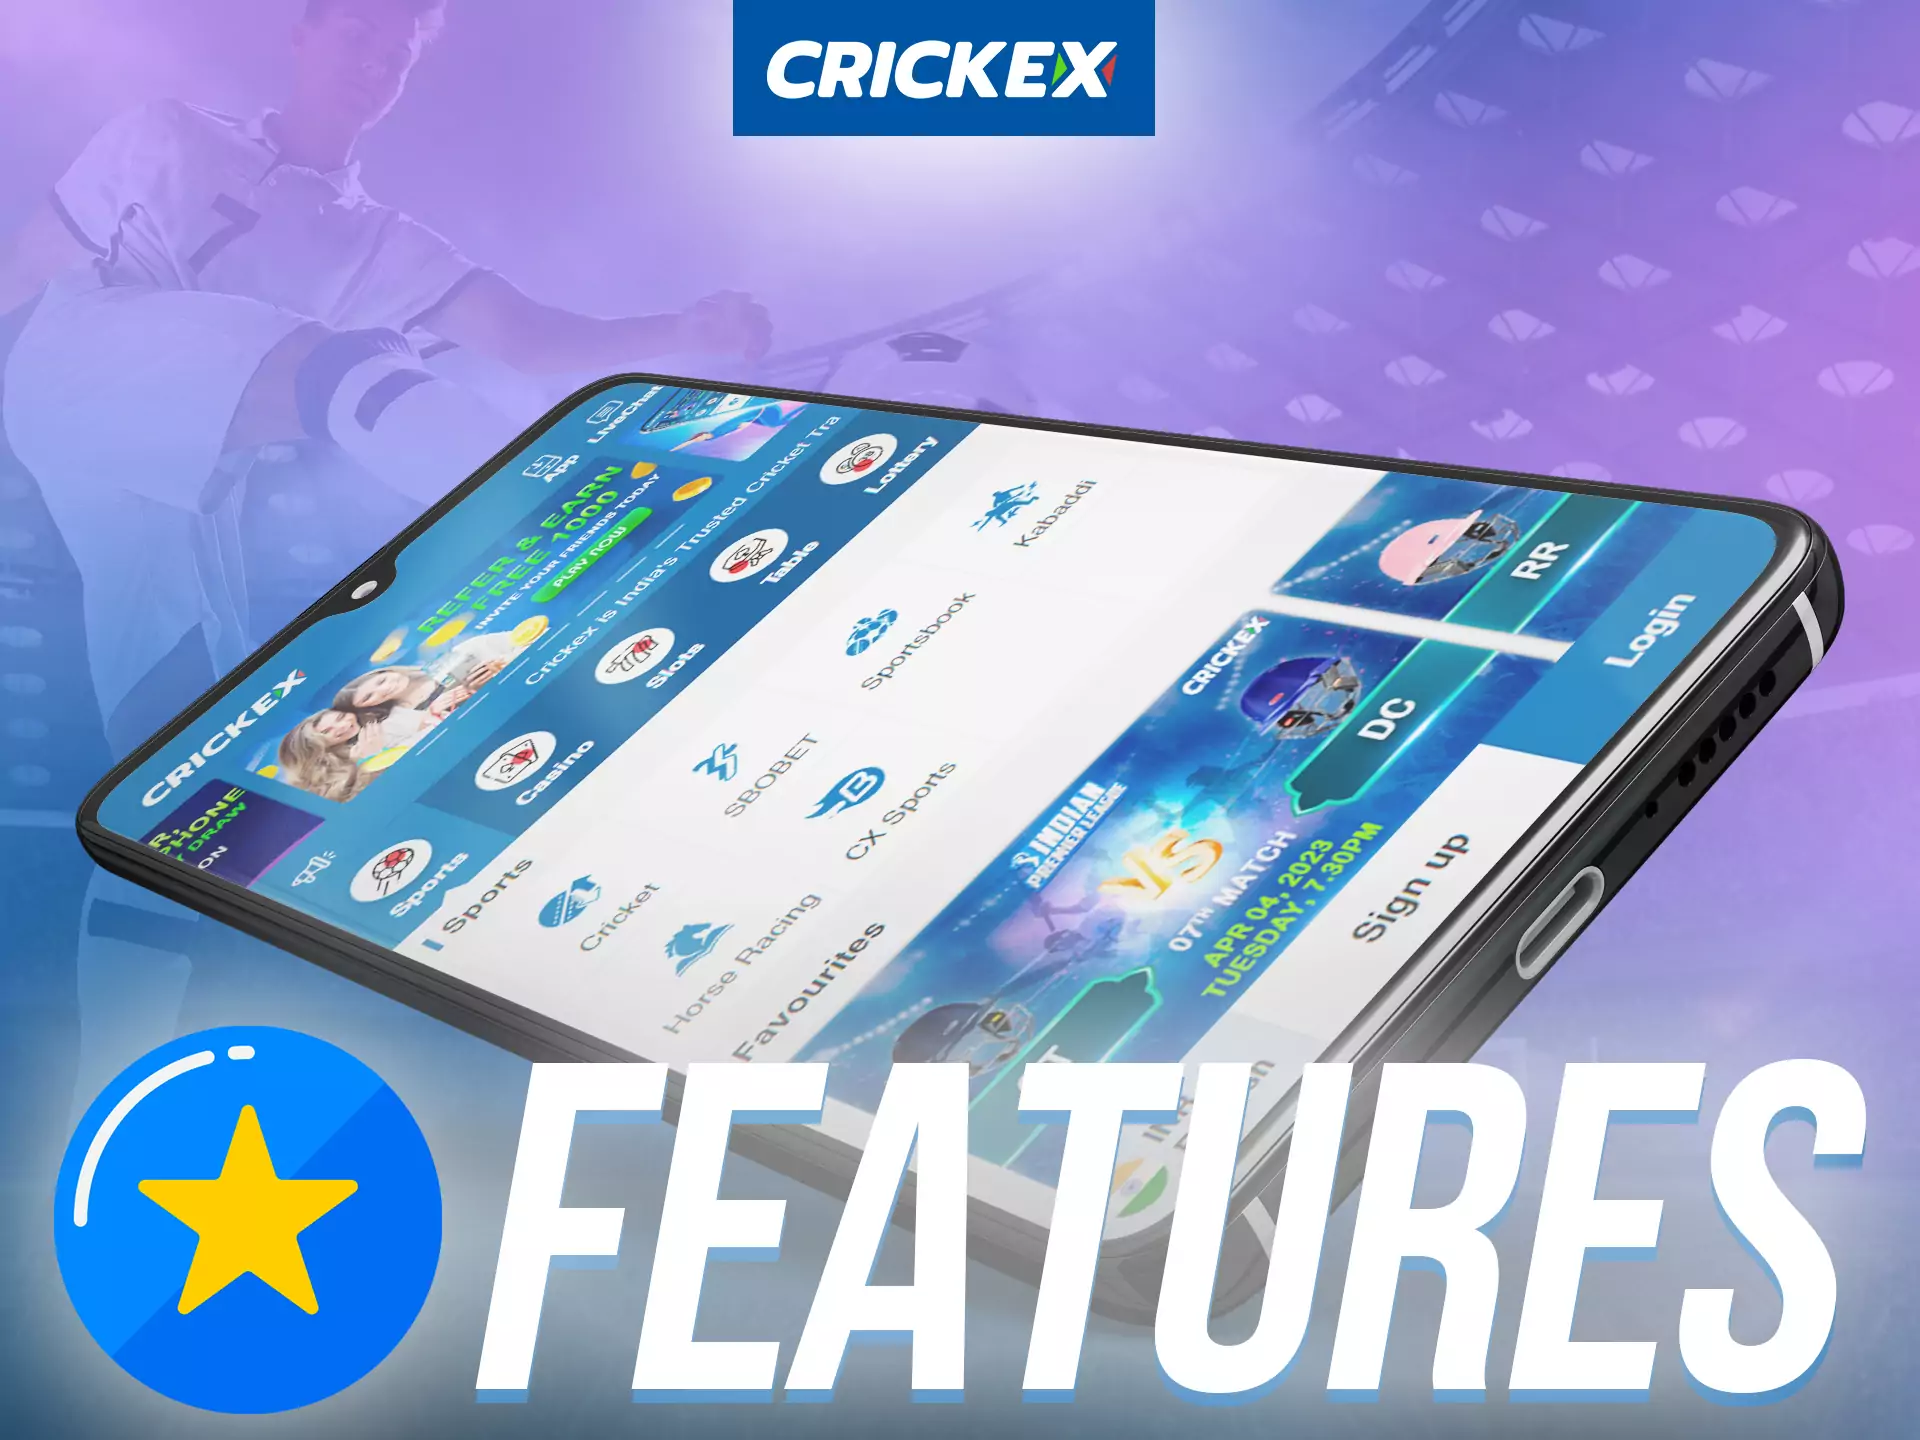 The Crickex app has many convenient features for betting and gaming.